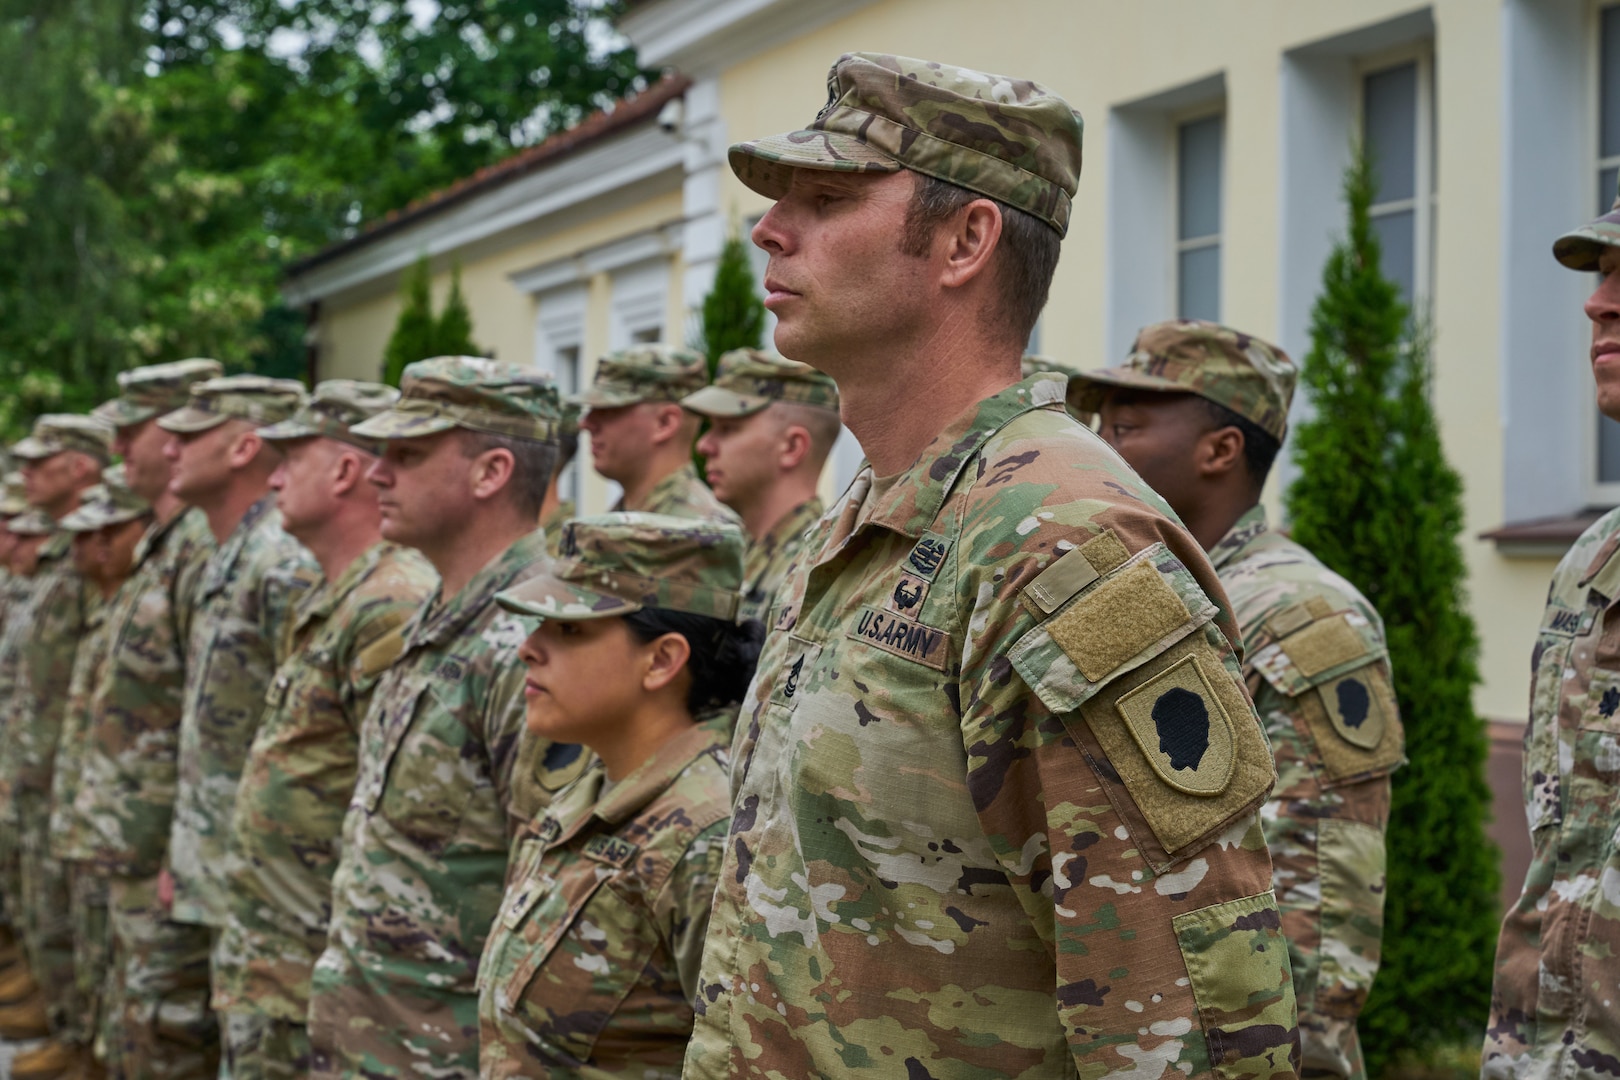 Soldiers of the 224th Digital Liaison Detachment of the Illinois National Guard stand in formation in Krakow, Poland, May 25, 2022. The 244th provided a valuable information bridge between V Corps and the Polish army during the DEFENDER-Europe 22 exercise.